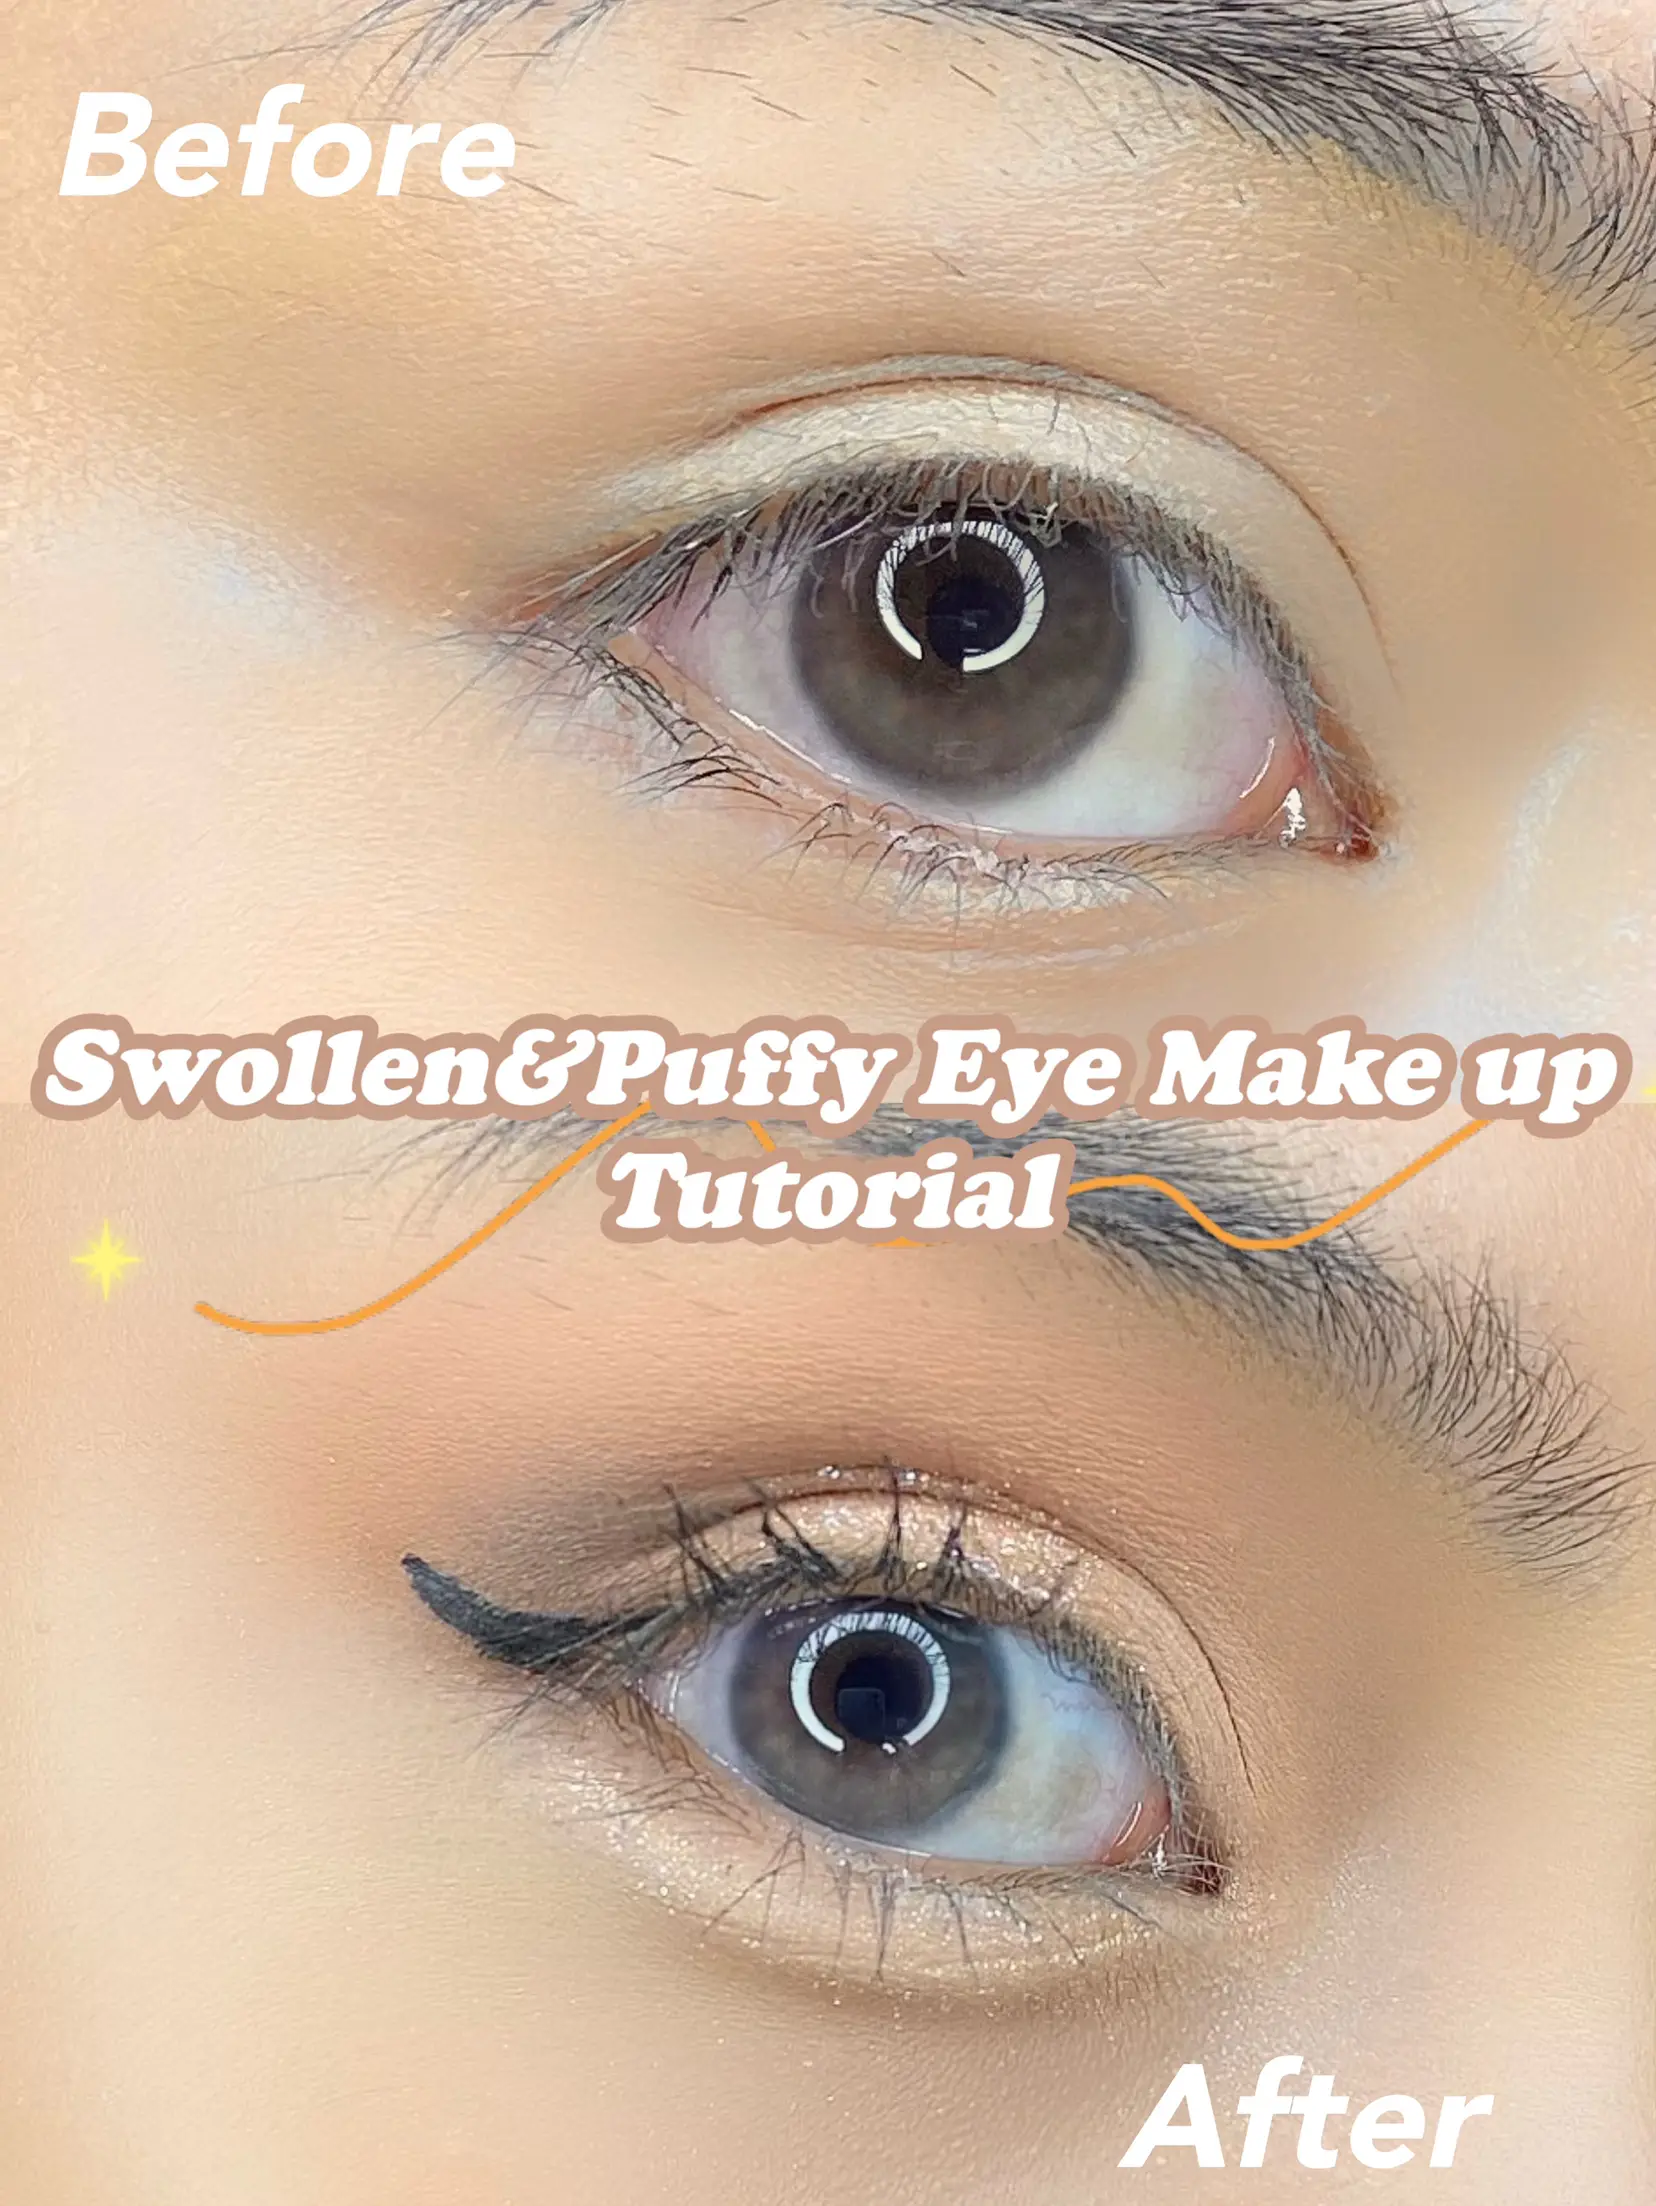 MAKEUP FOR SWOLLEN & PUFFY EYES! 